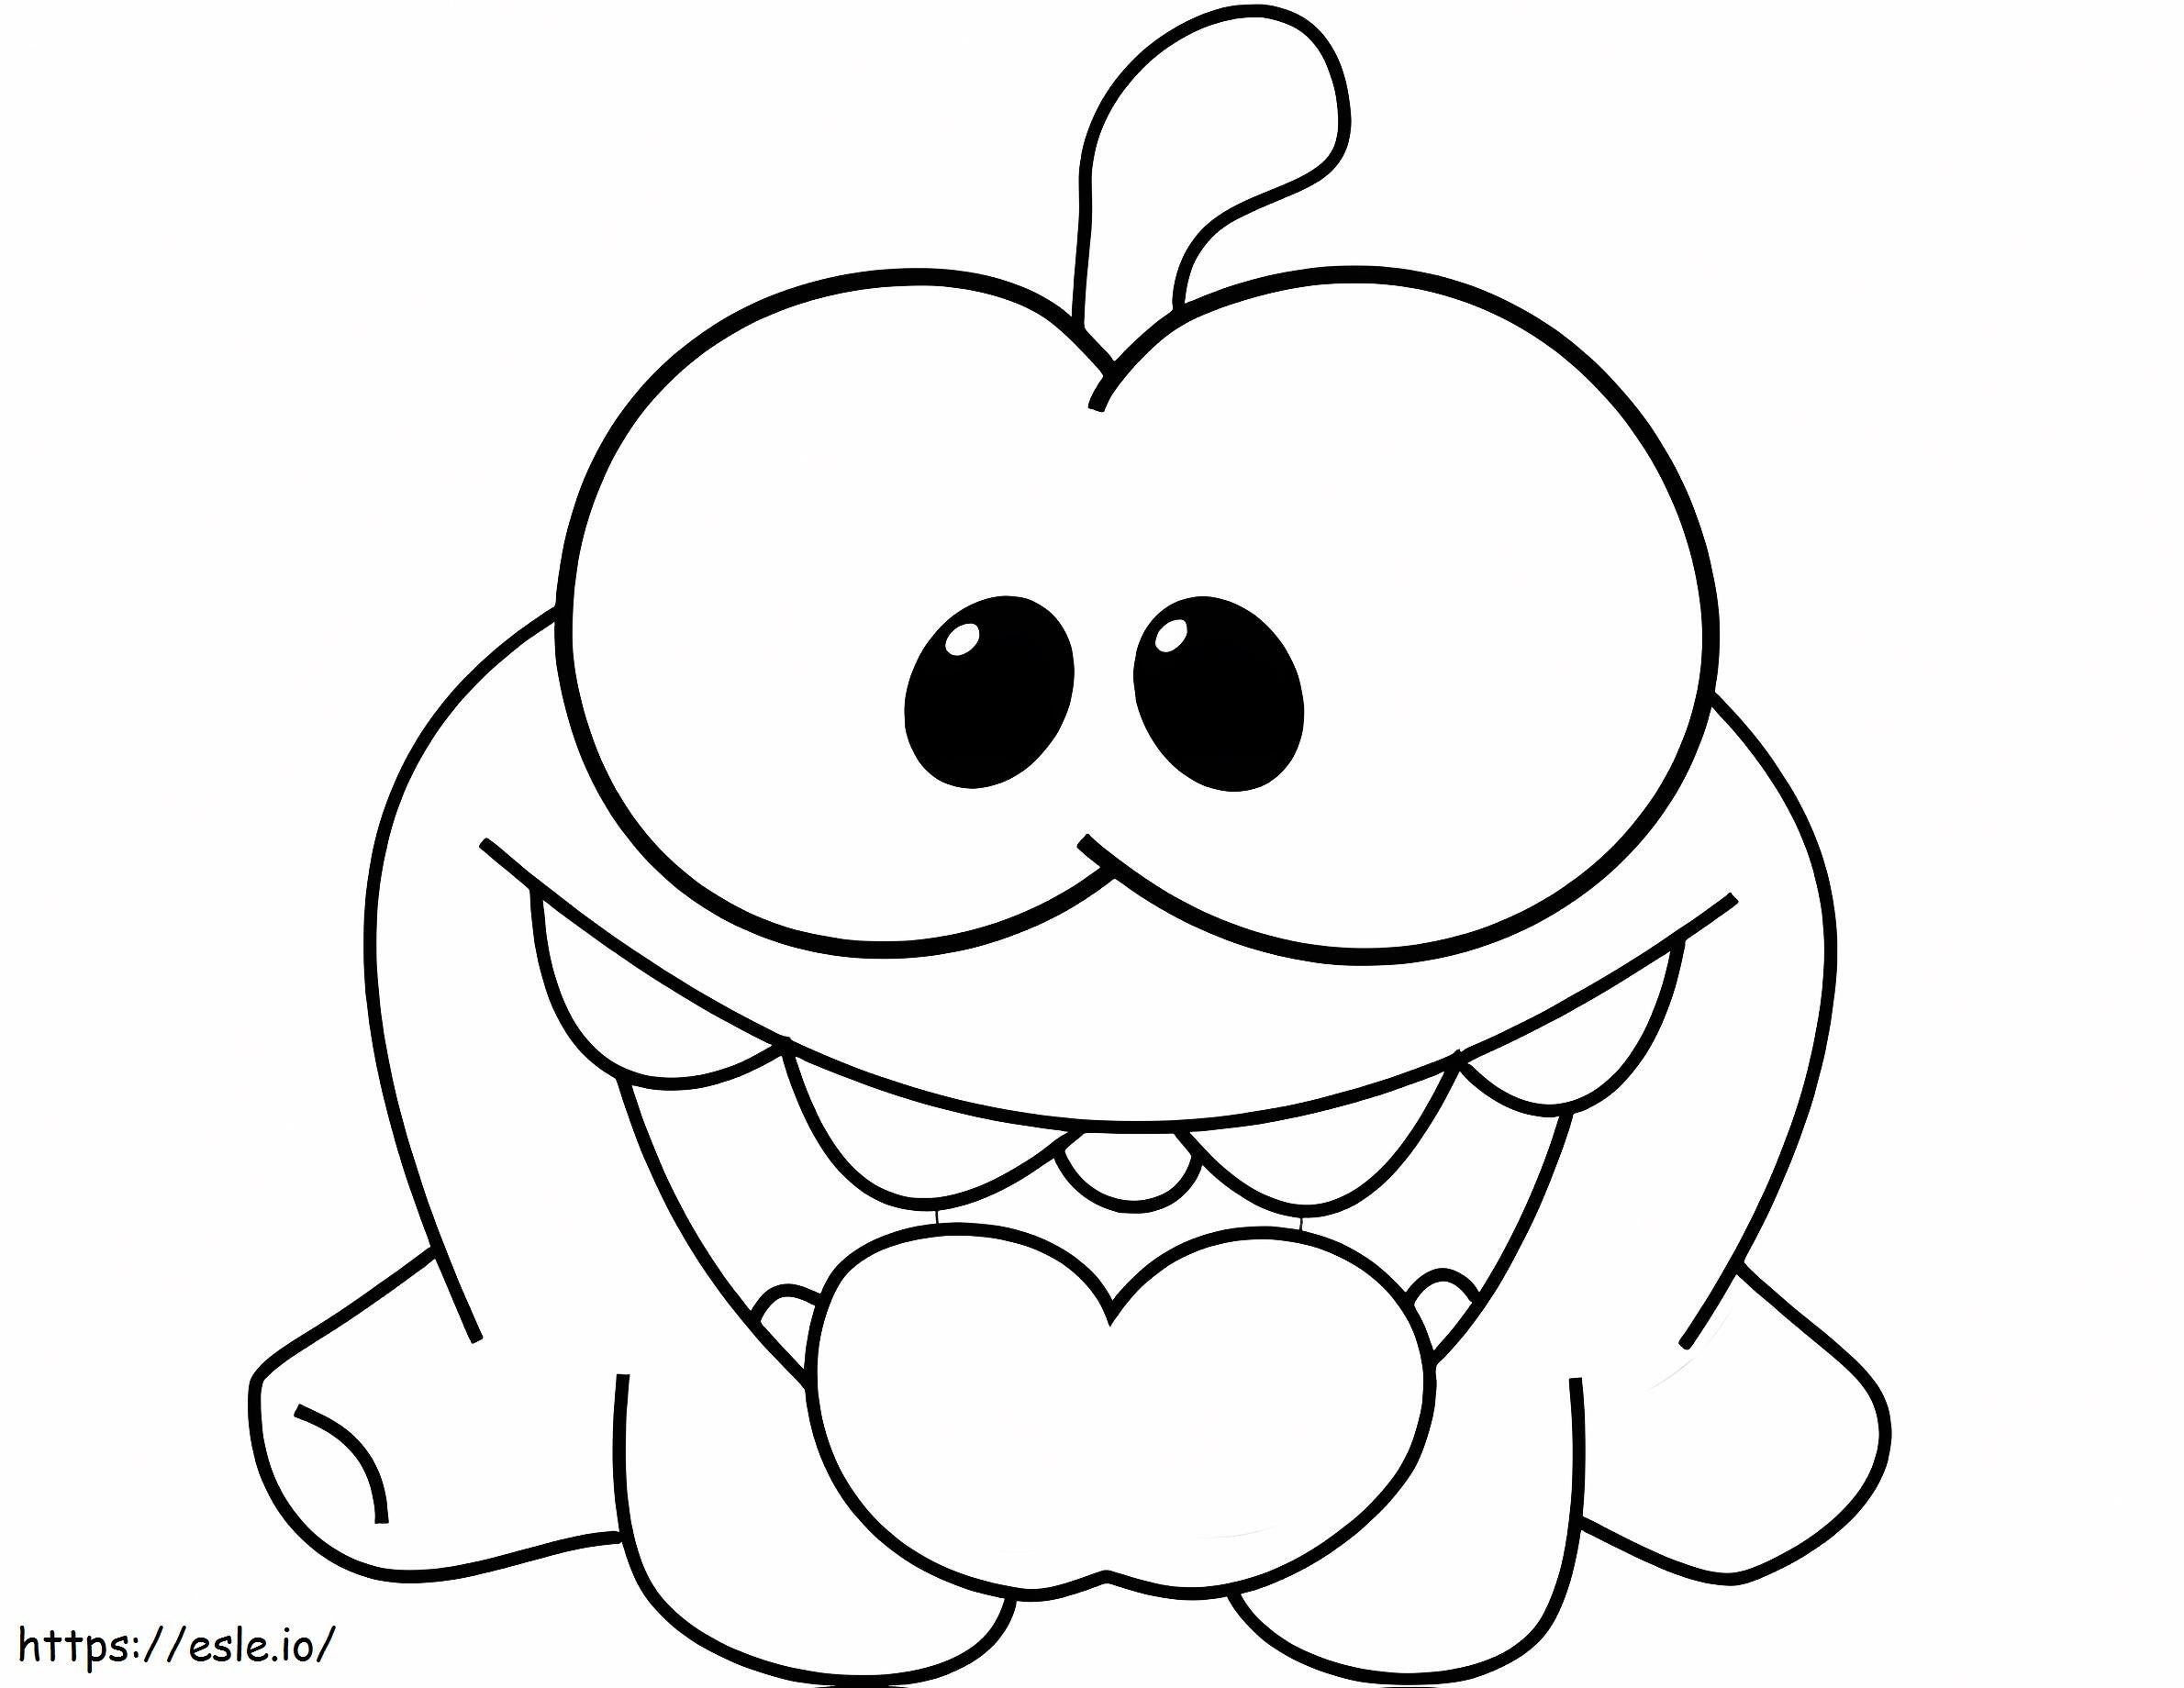 Om Nom Sitting coloring page